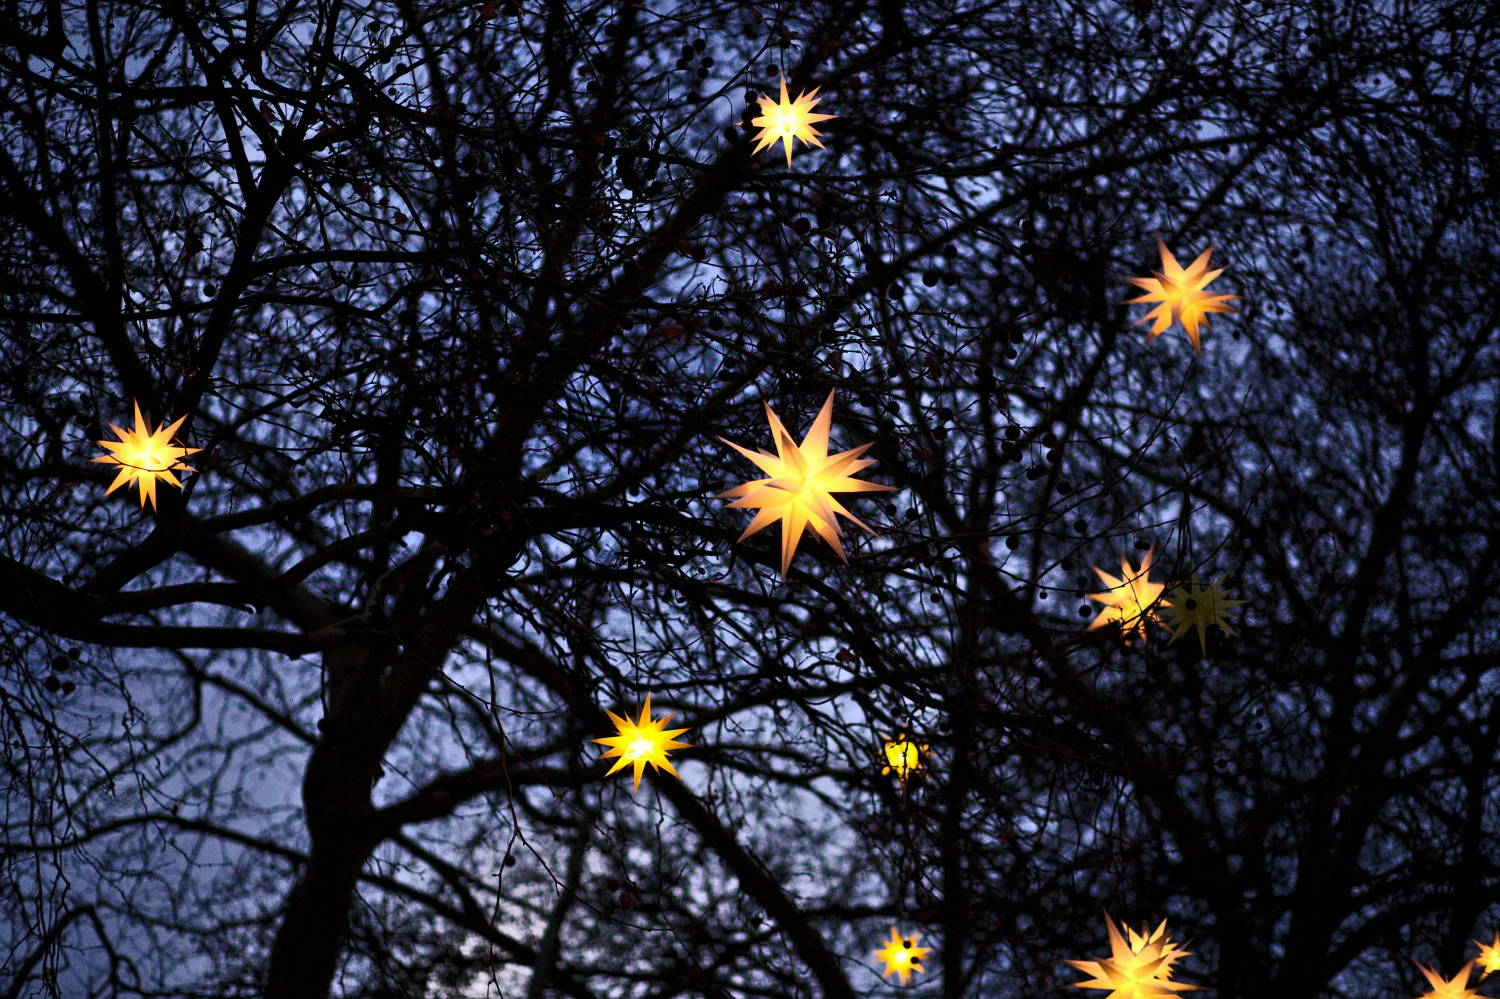 Star-shaped lights hung in a tree